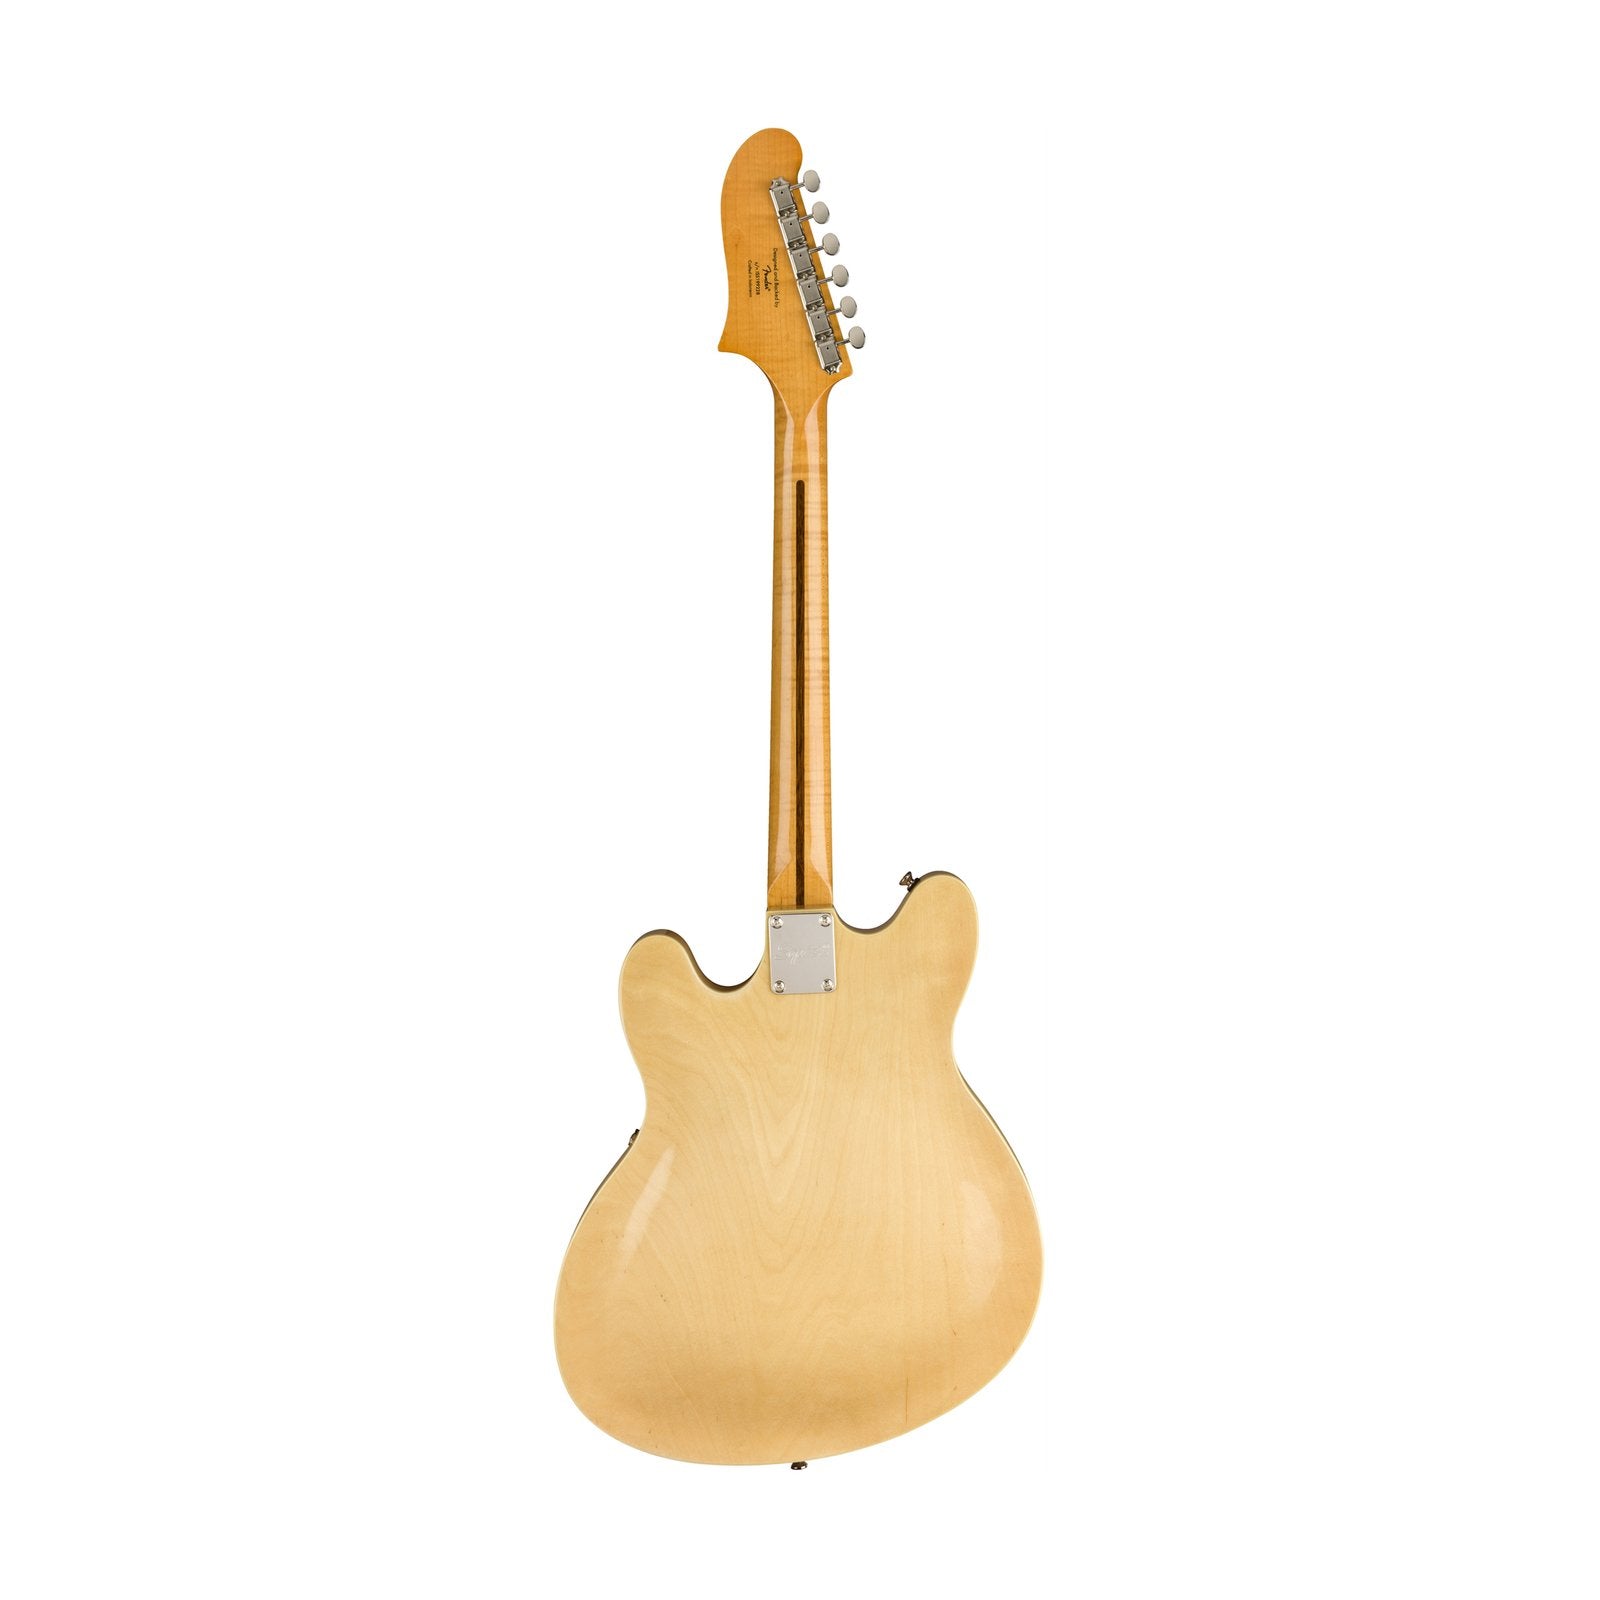 SQUIER CLASSIC VIBE STARCASTER ELECTRIC GUITAR, MAPLE FB, NATURAL, SQUIER BY FENDER, ELECTRIC GUITAR, squier-by-fender-electric-guitar-037-4590-521, ZOSO MUSIC SDN BHD